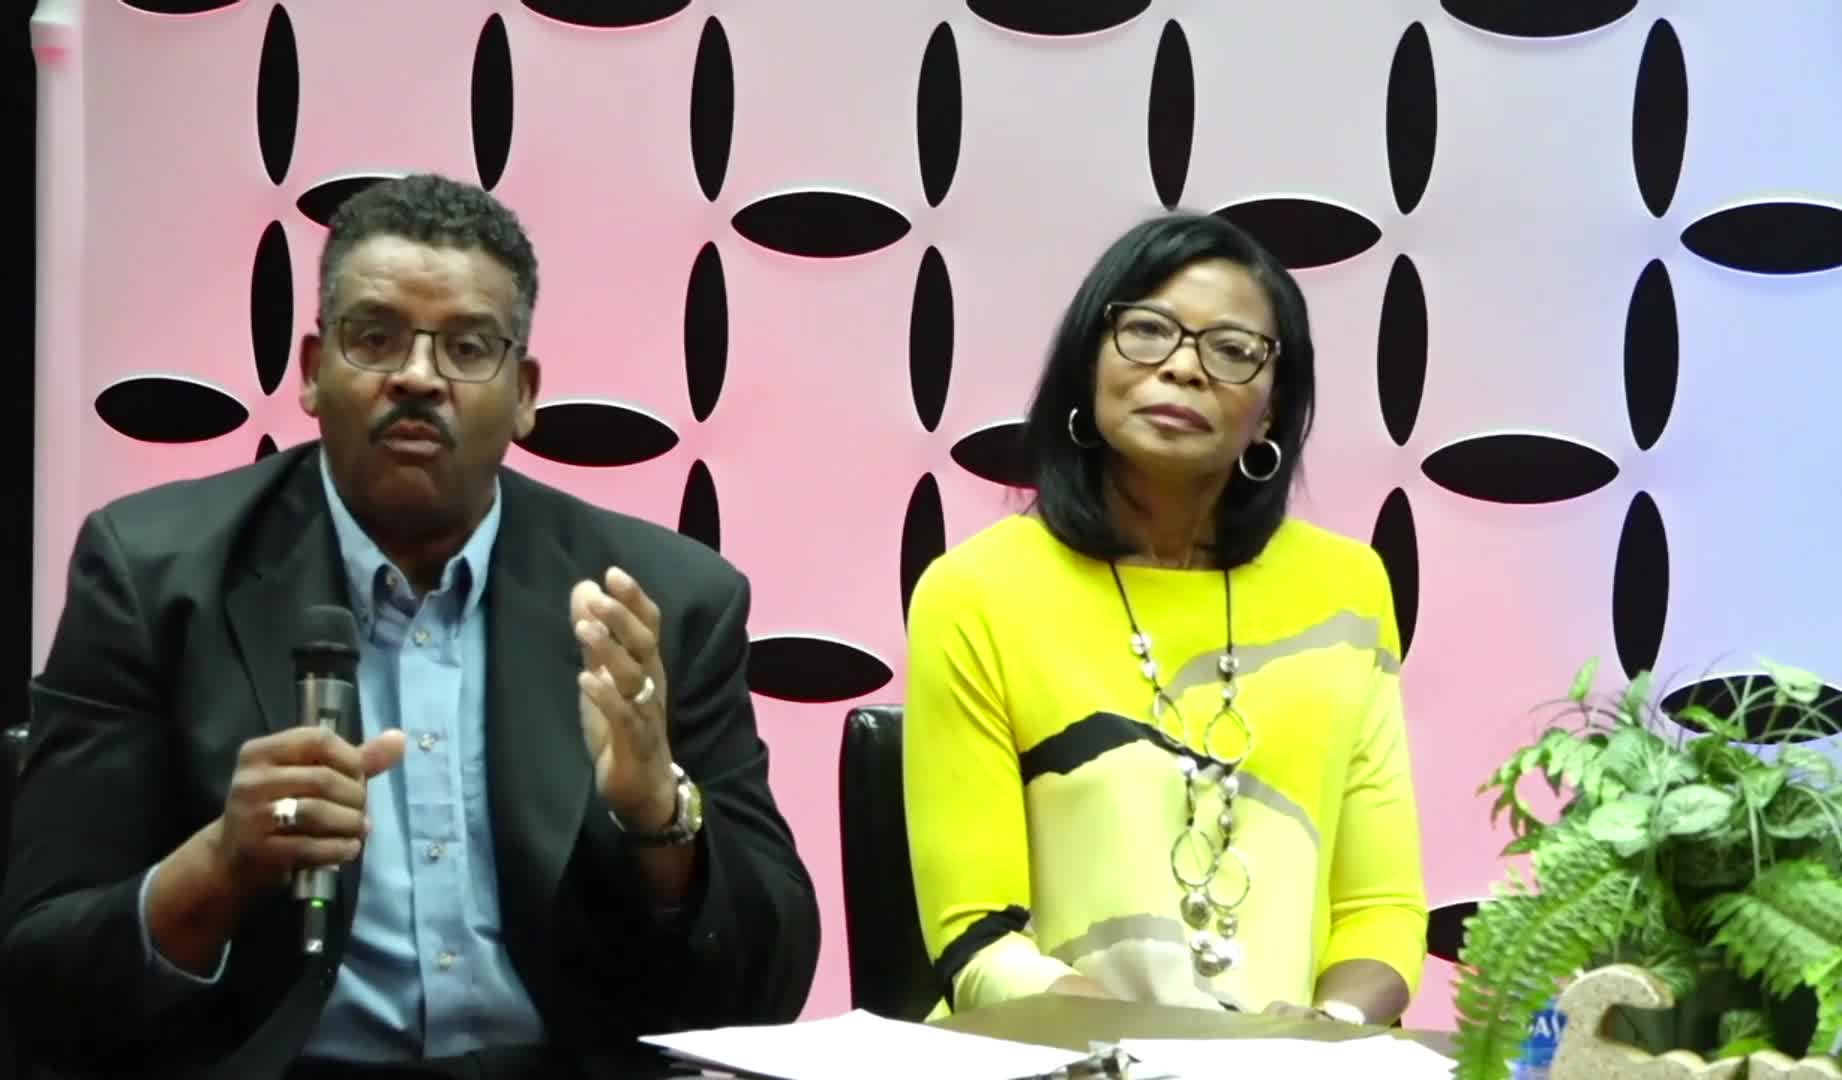 Drs. Joseph & Marjanita w/guest Dr. & Mrs. McCants-Family Matters-Familiesin Business-Wed. Oct.19th, 202227:30PM